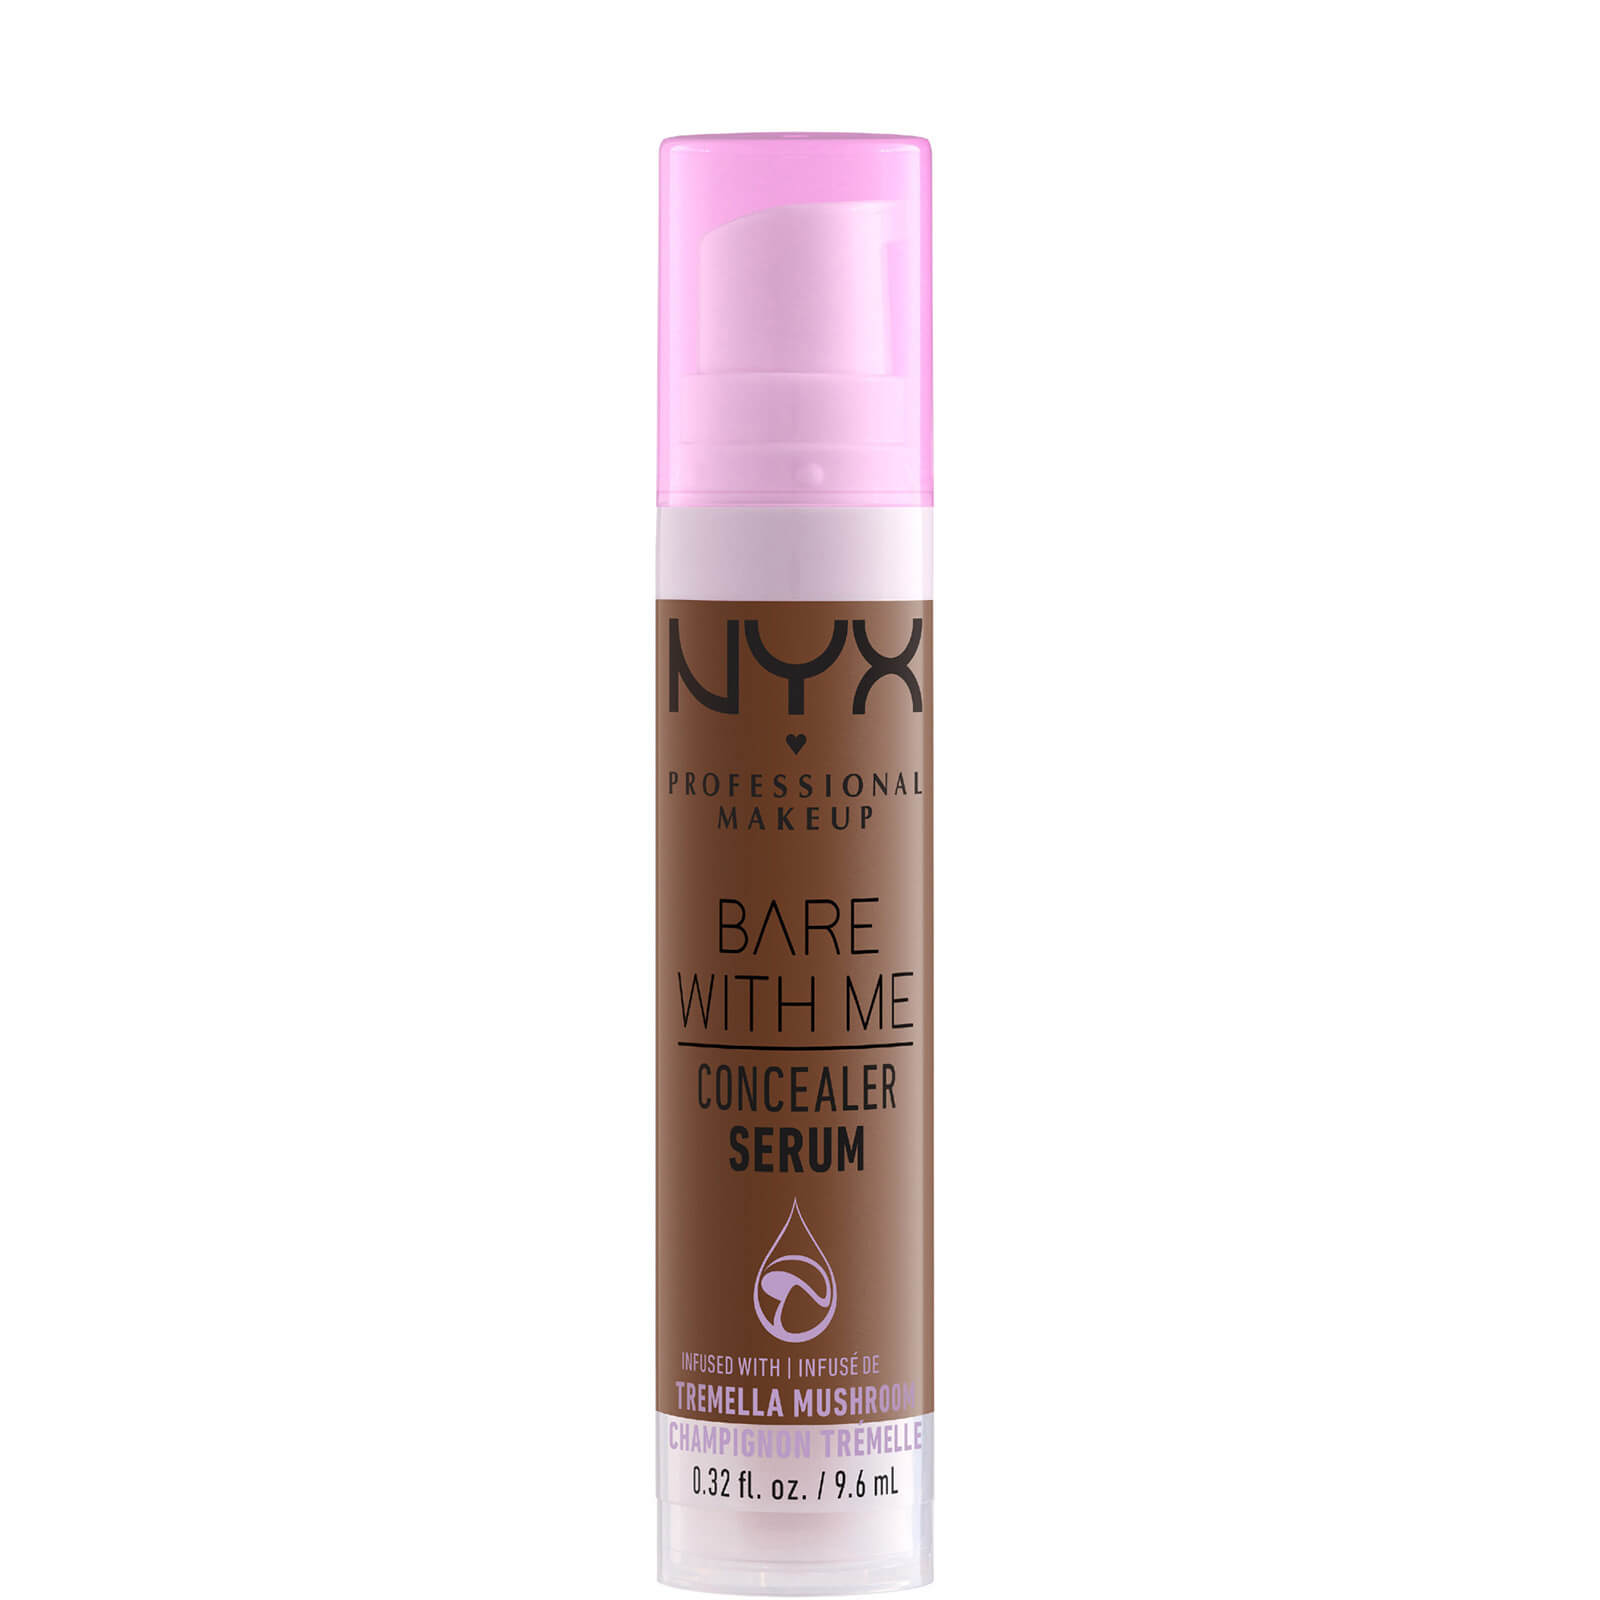 Image of NYX Professional Makeup Bare With Me Concealer Serum 9.6ml (Various Shades) - Rich